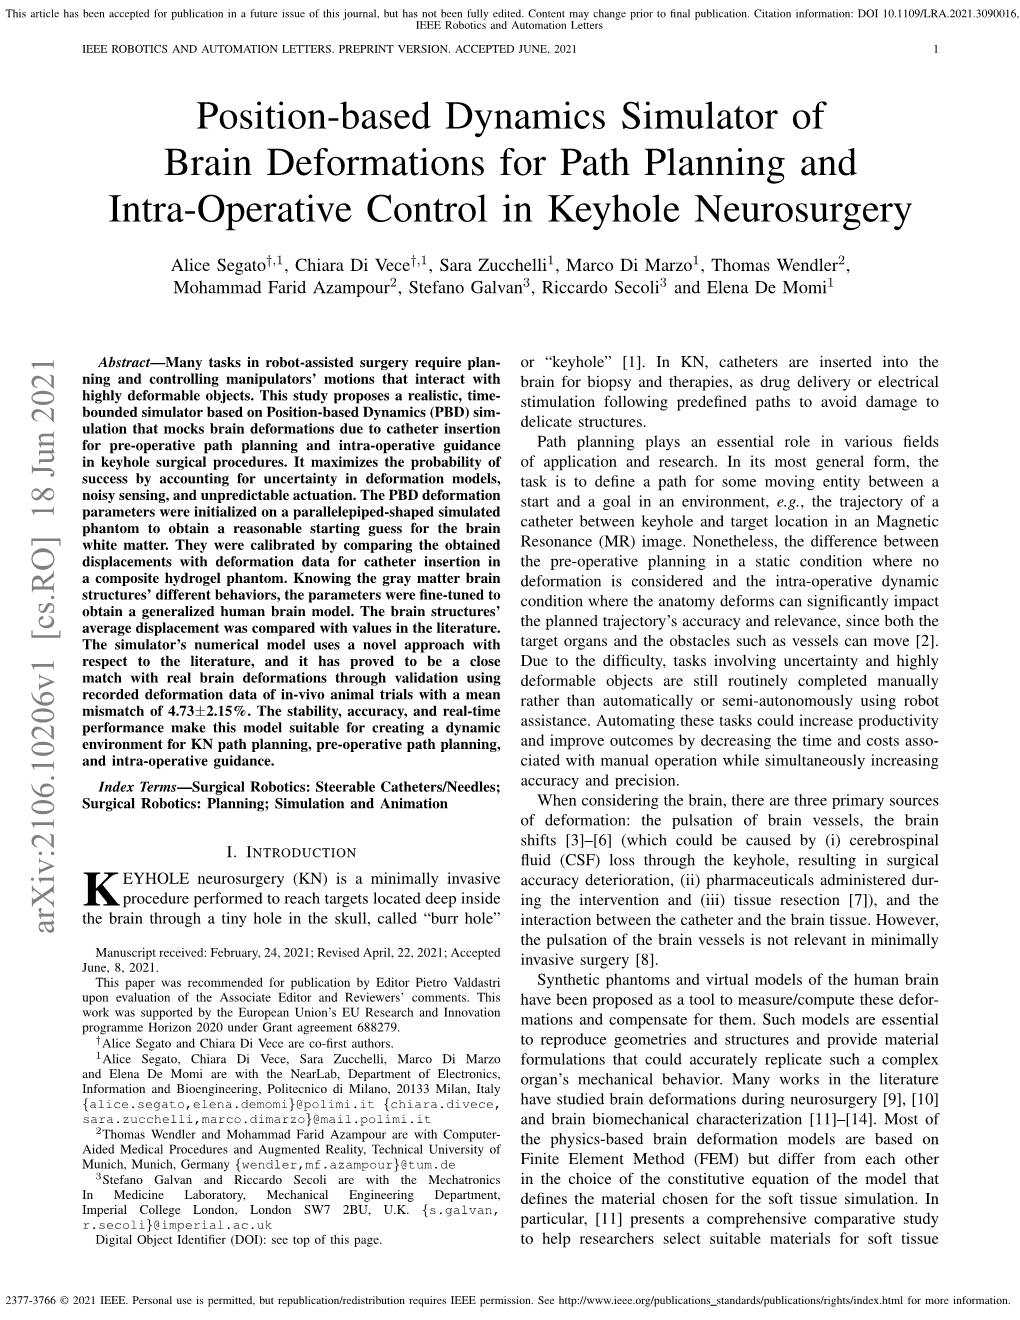 Position-Based Dynamics Simulator of Brain Deformations for Path Planning and Intra-Operative Control in Keyhole Neurosurgery